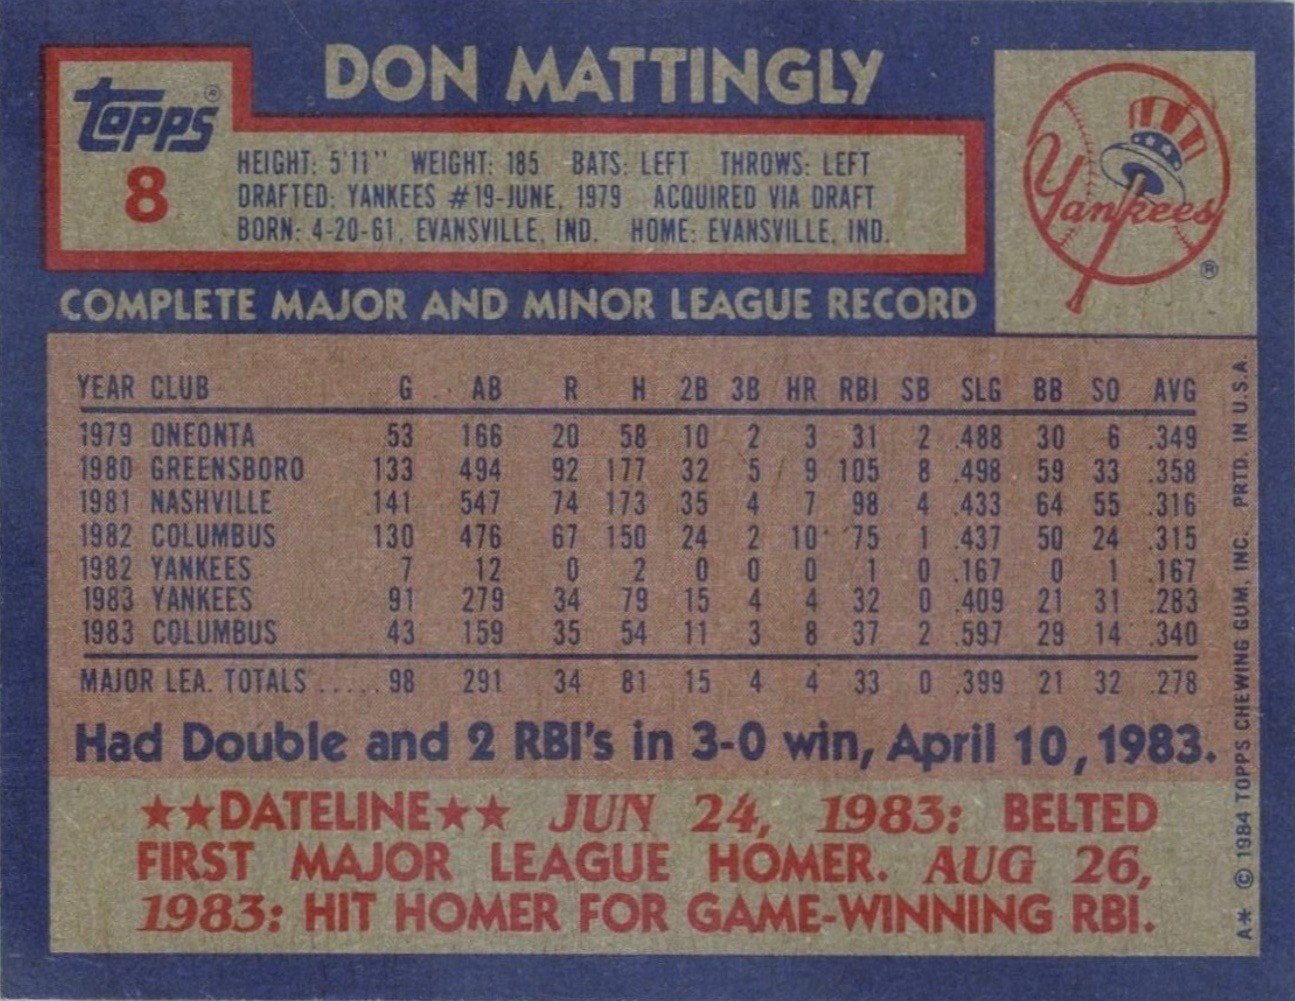 1984 Topps #8 Don Mattingly Baseball Card Reverse Side With Statistics and Biography